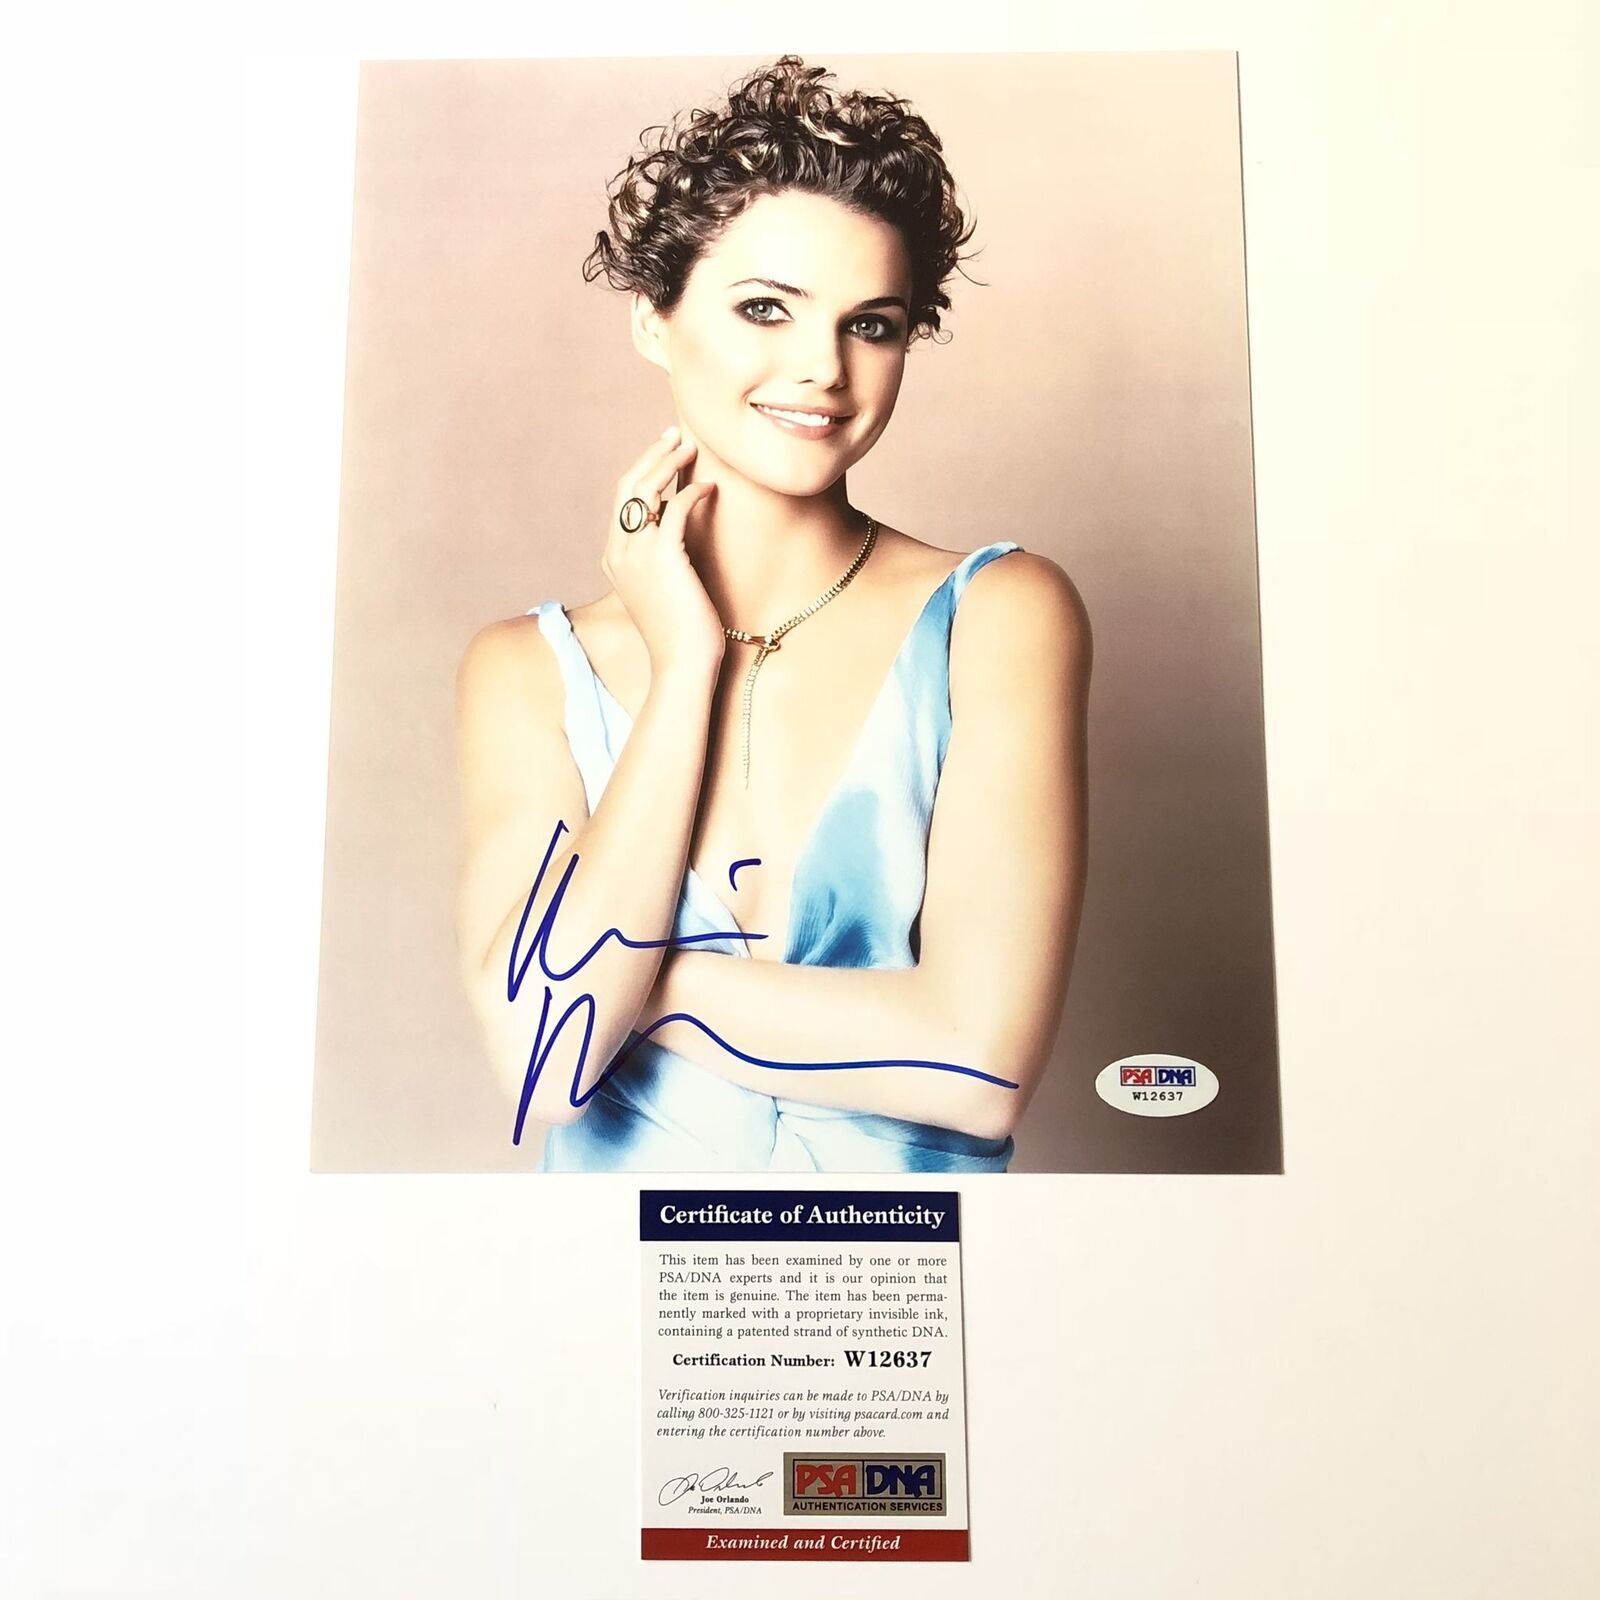 Keri Russell signed 8x10 Photo Poster painting PSA/DNA Autographed